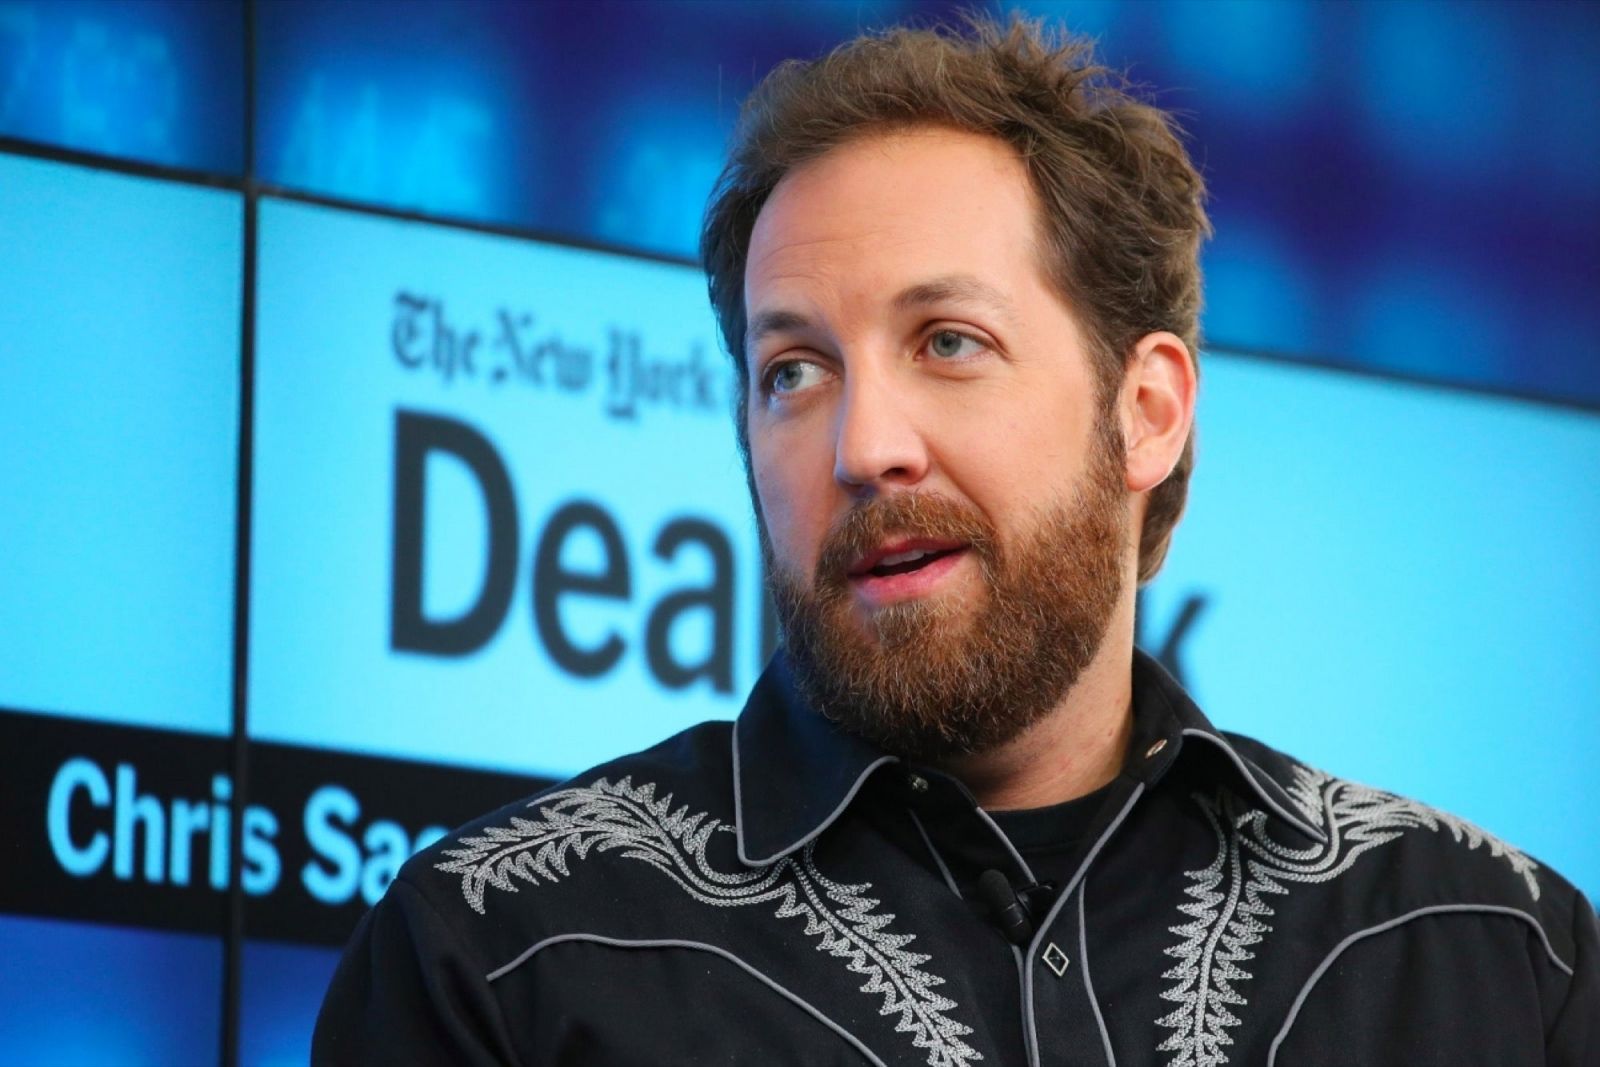 Chris Sacca’s Investments Include Twitter & Instagram